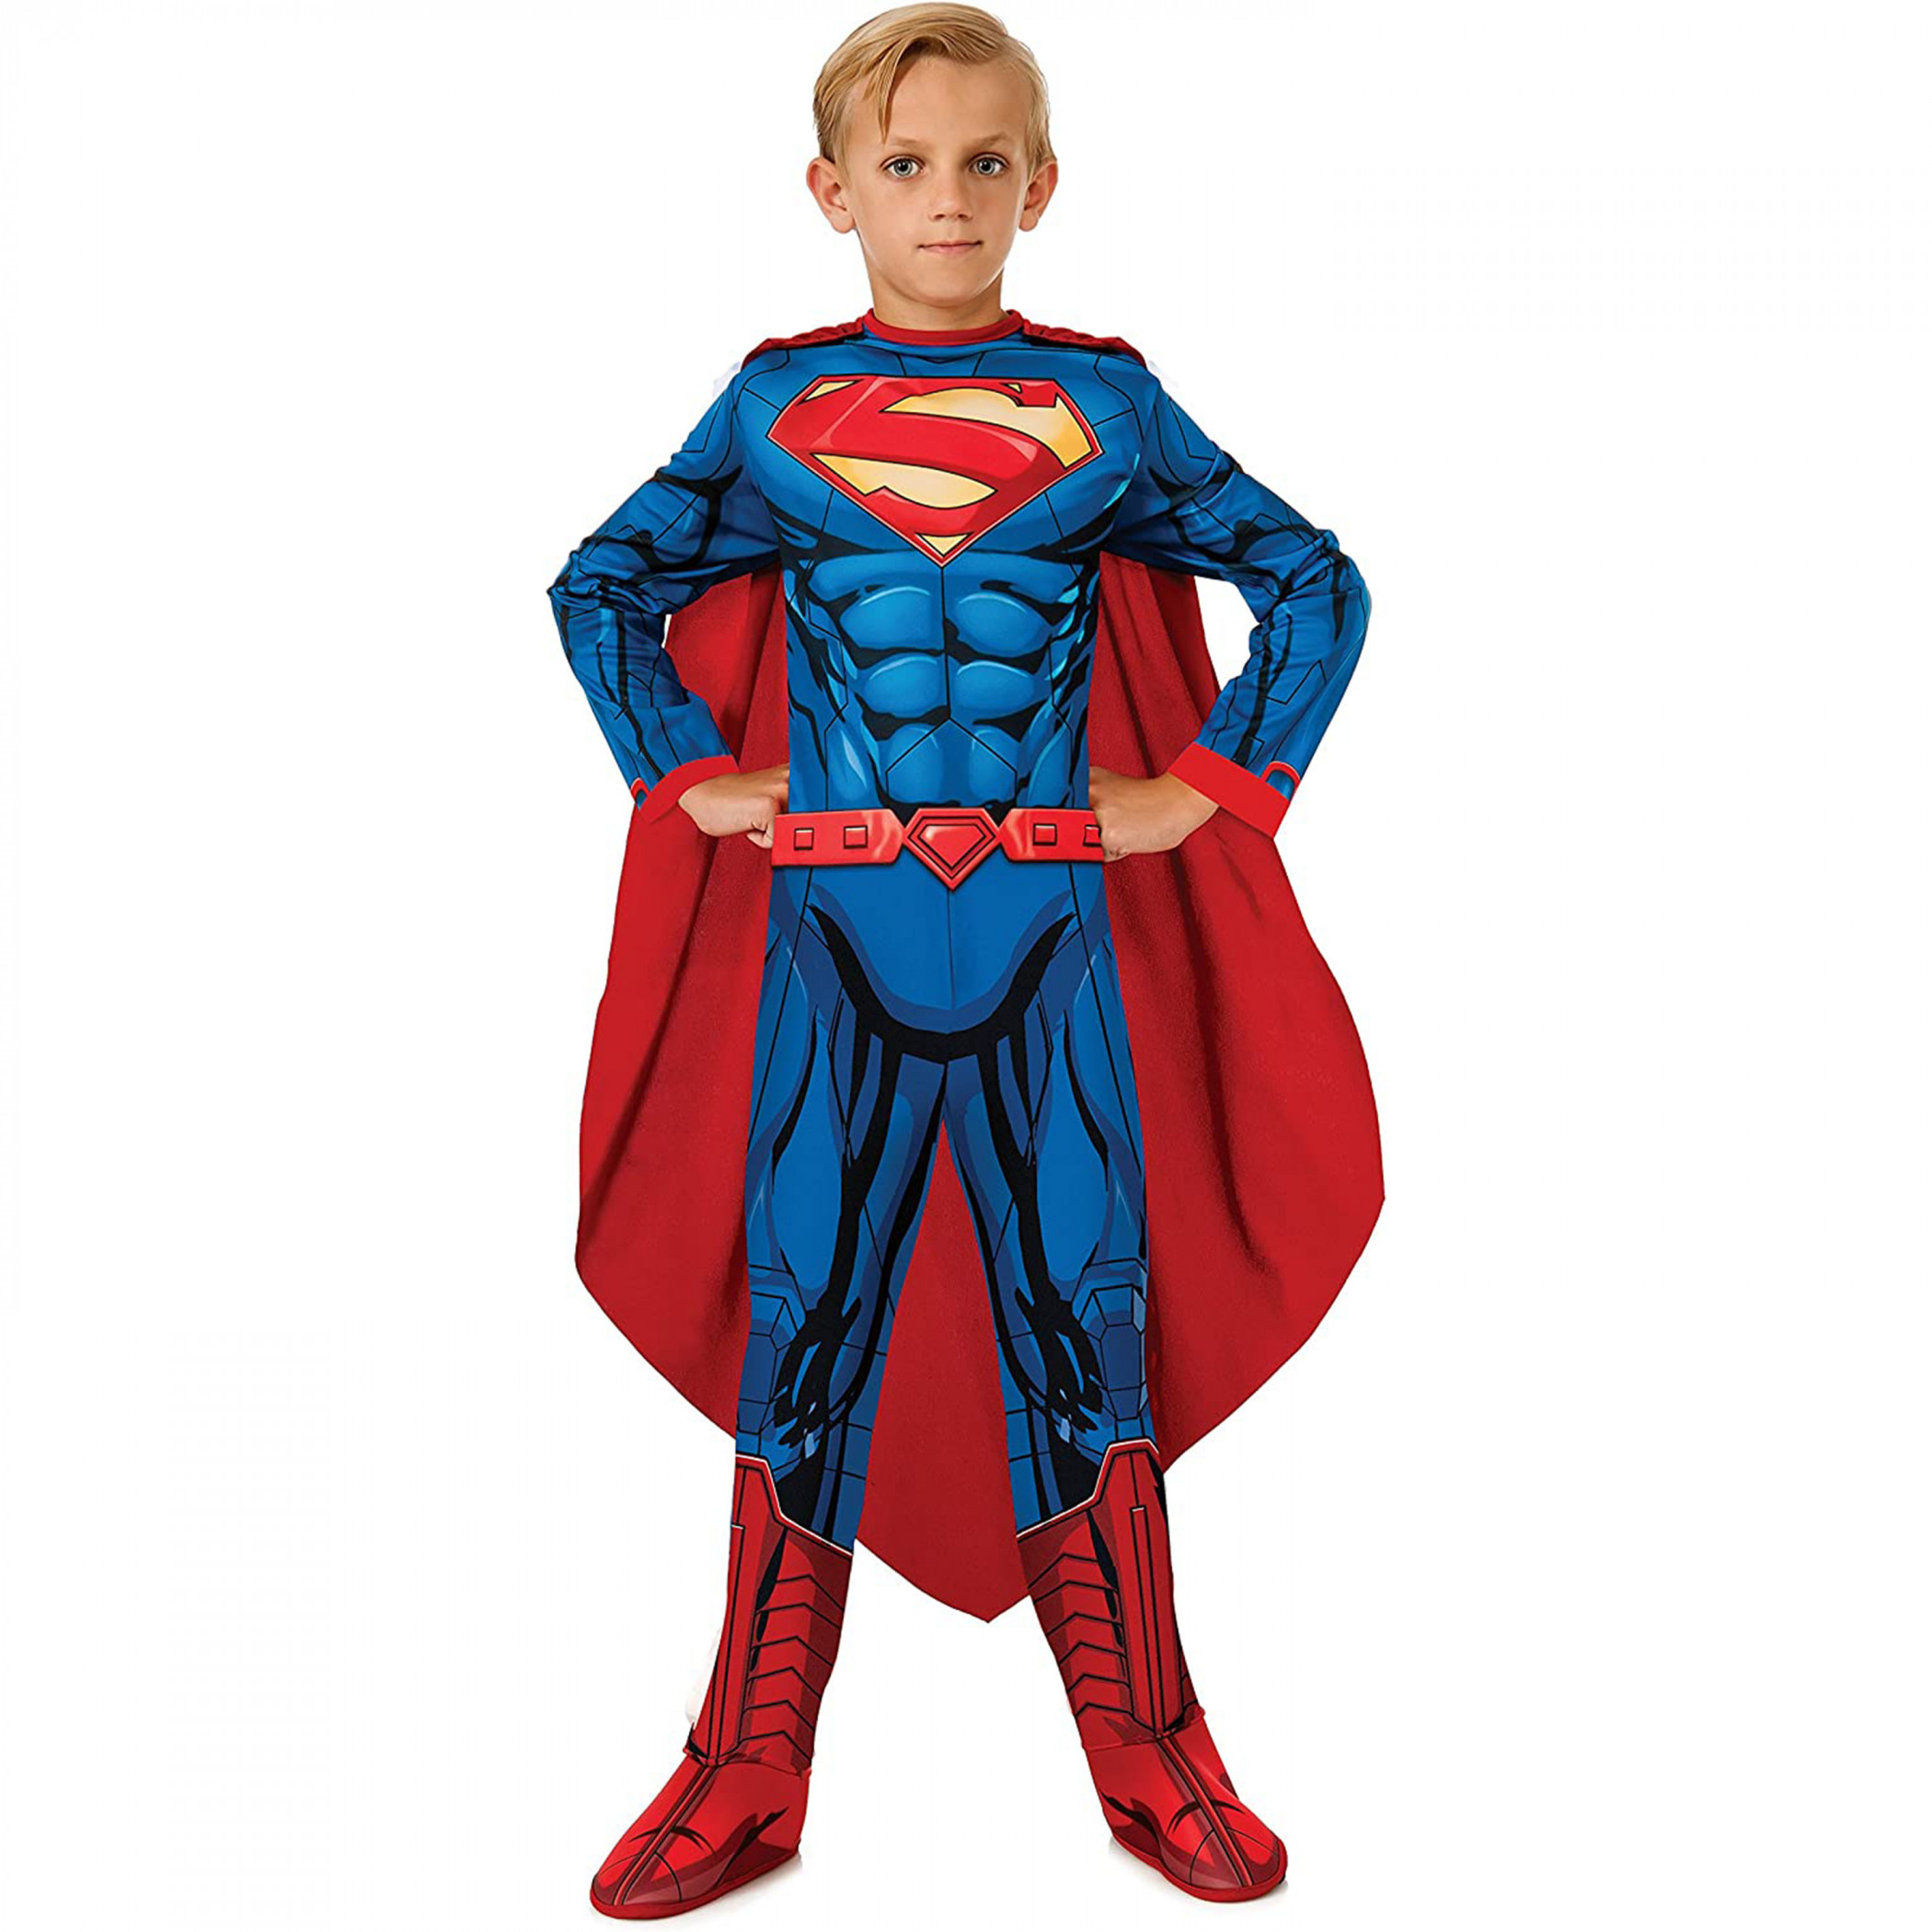 Superman Full Suit with Cape Deluxe Kid's Costume